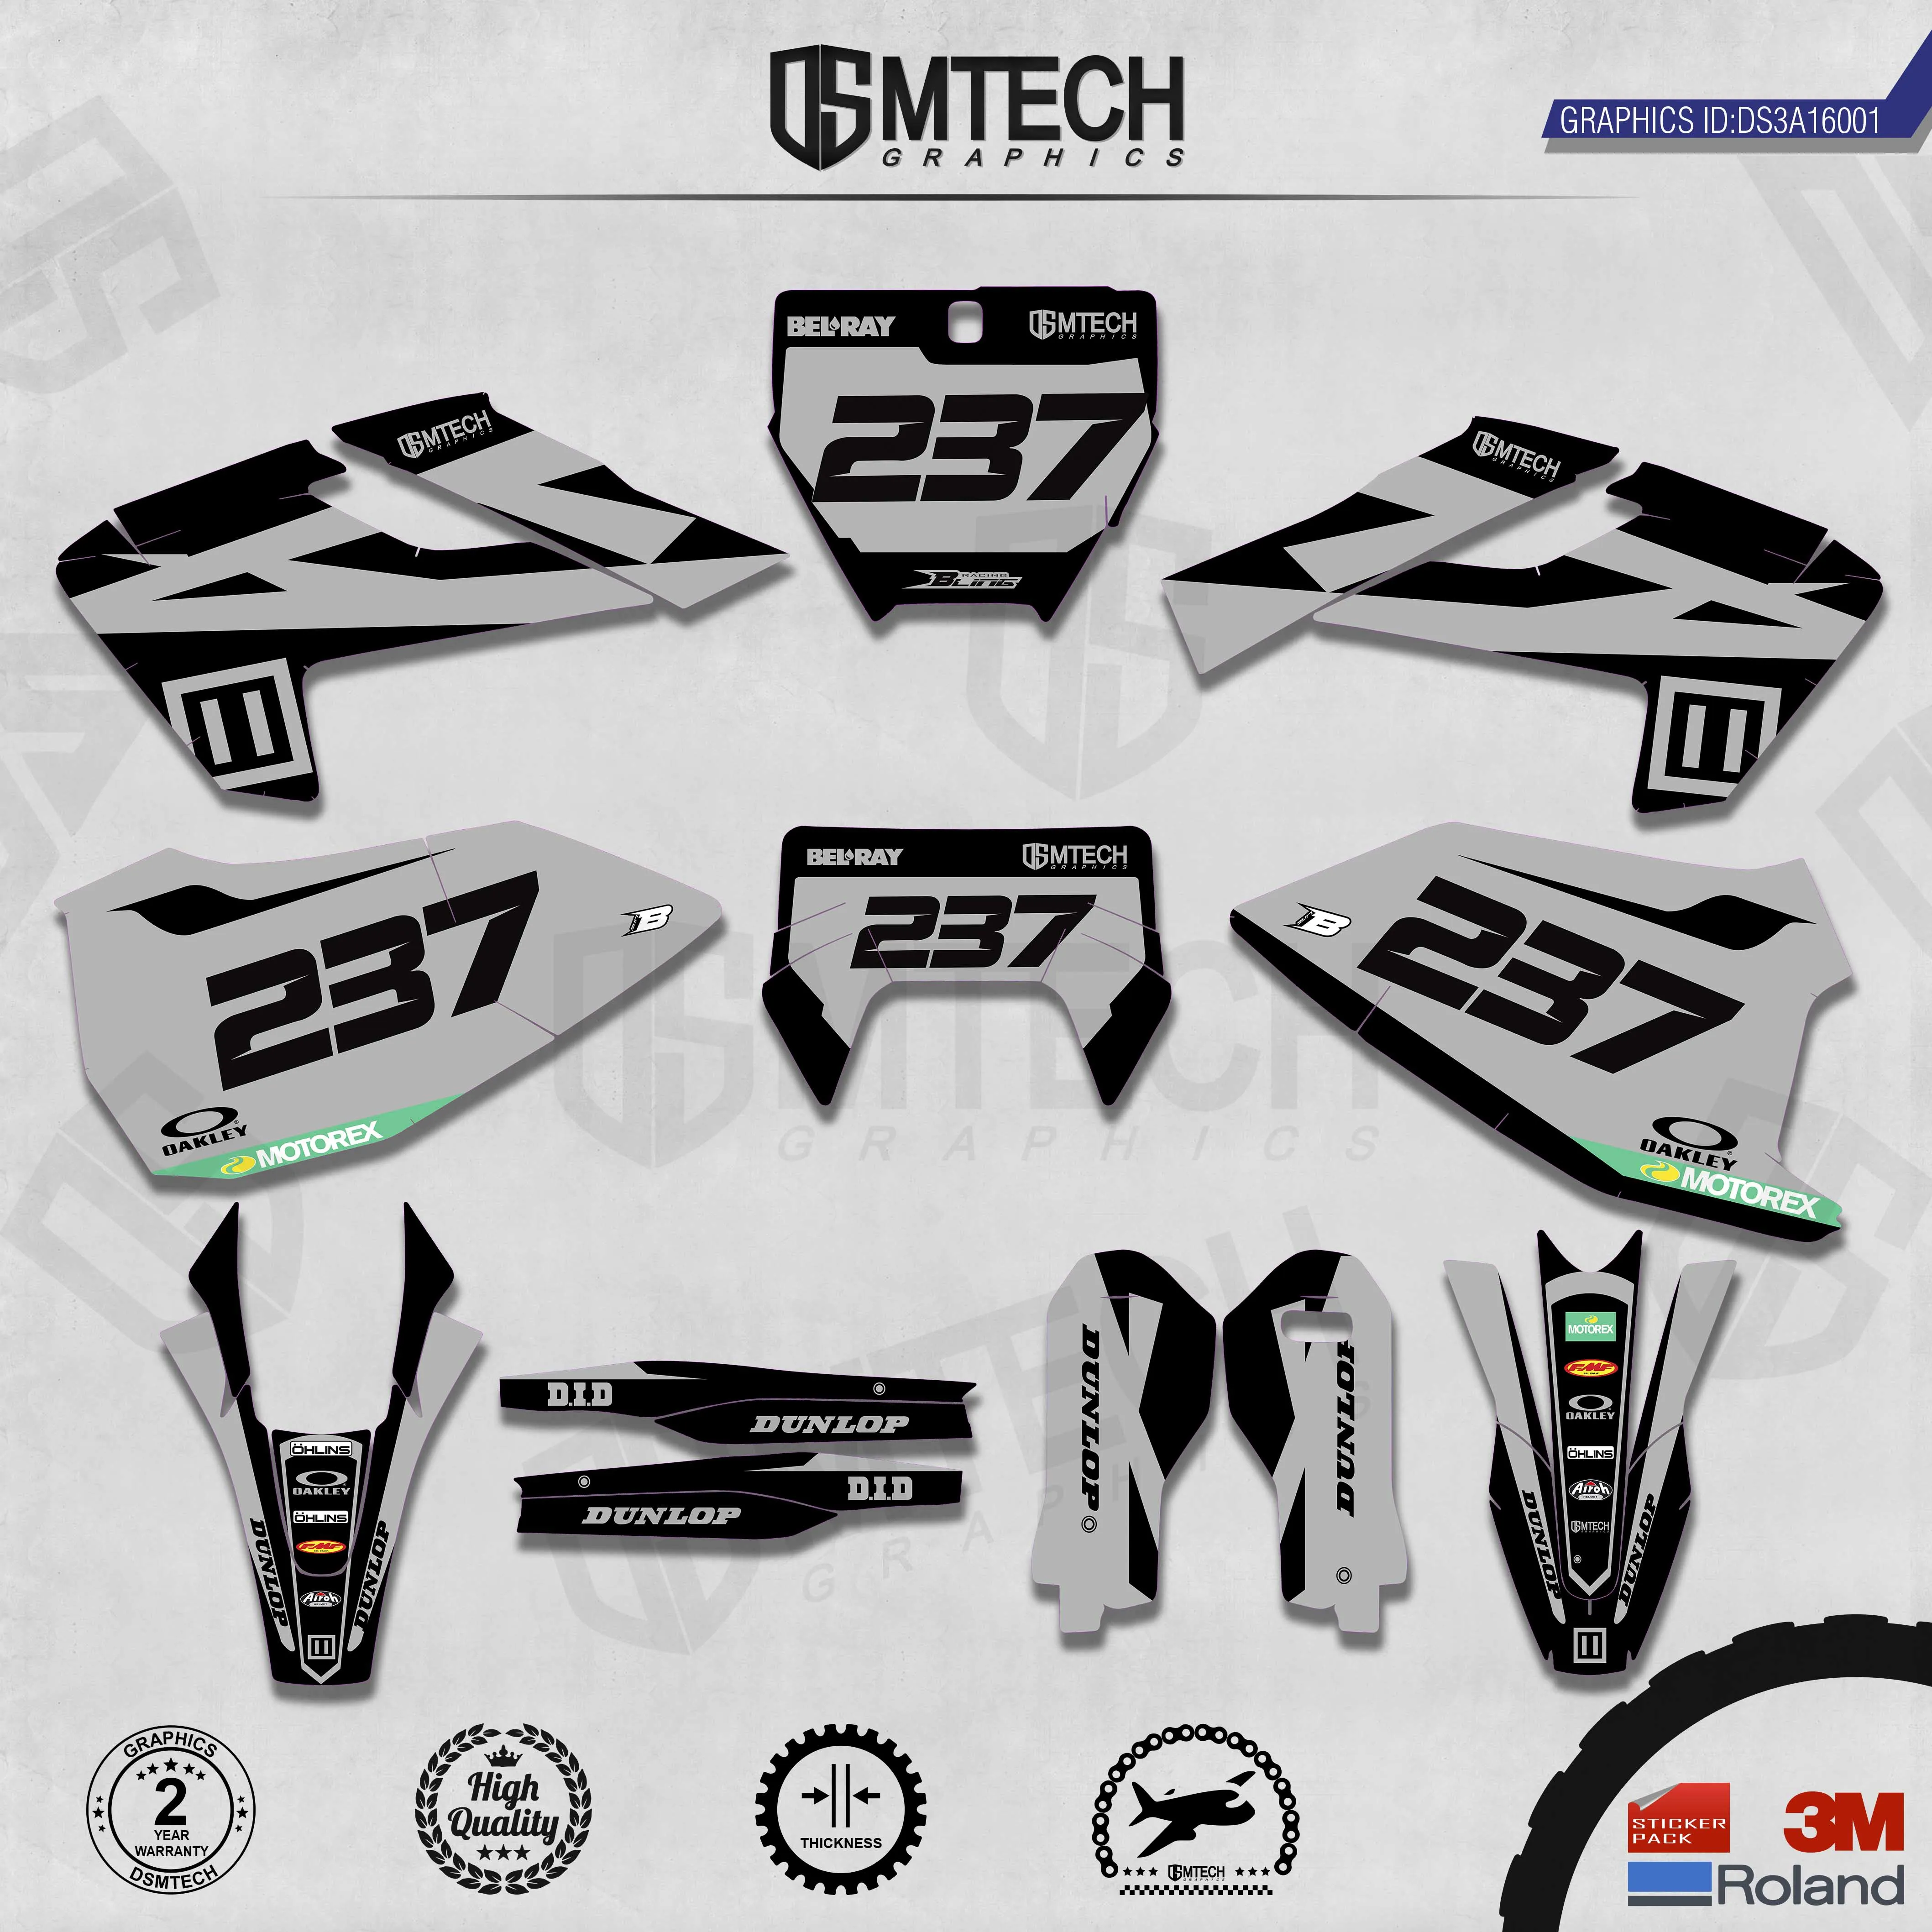 DSMTECH Customized Team Graphics Backgrounds Decals 3M Custom Stickers For TC FC TX FX FS 2016-2018  TE FE 2017-2019  001